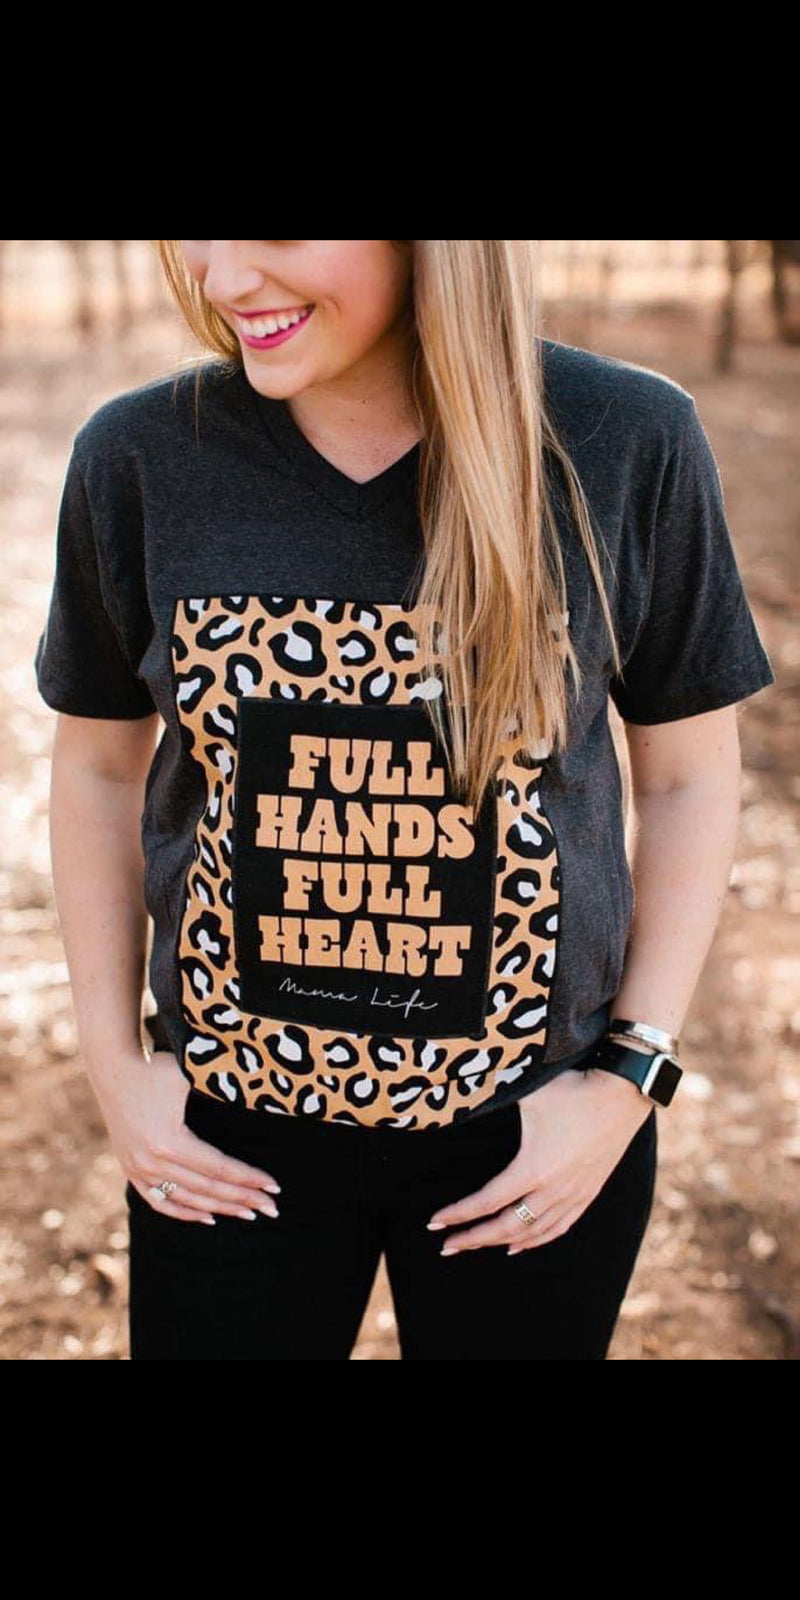 Full Hands Full Heart Mama Life Top - Also in Plus Size